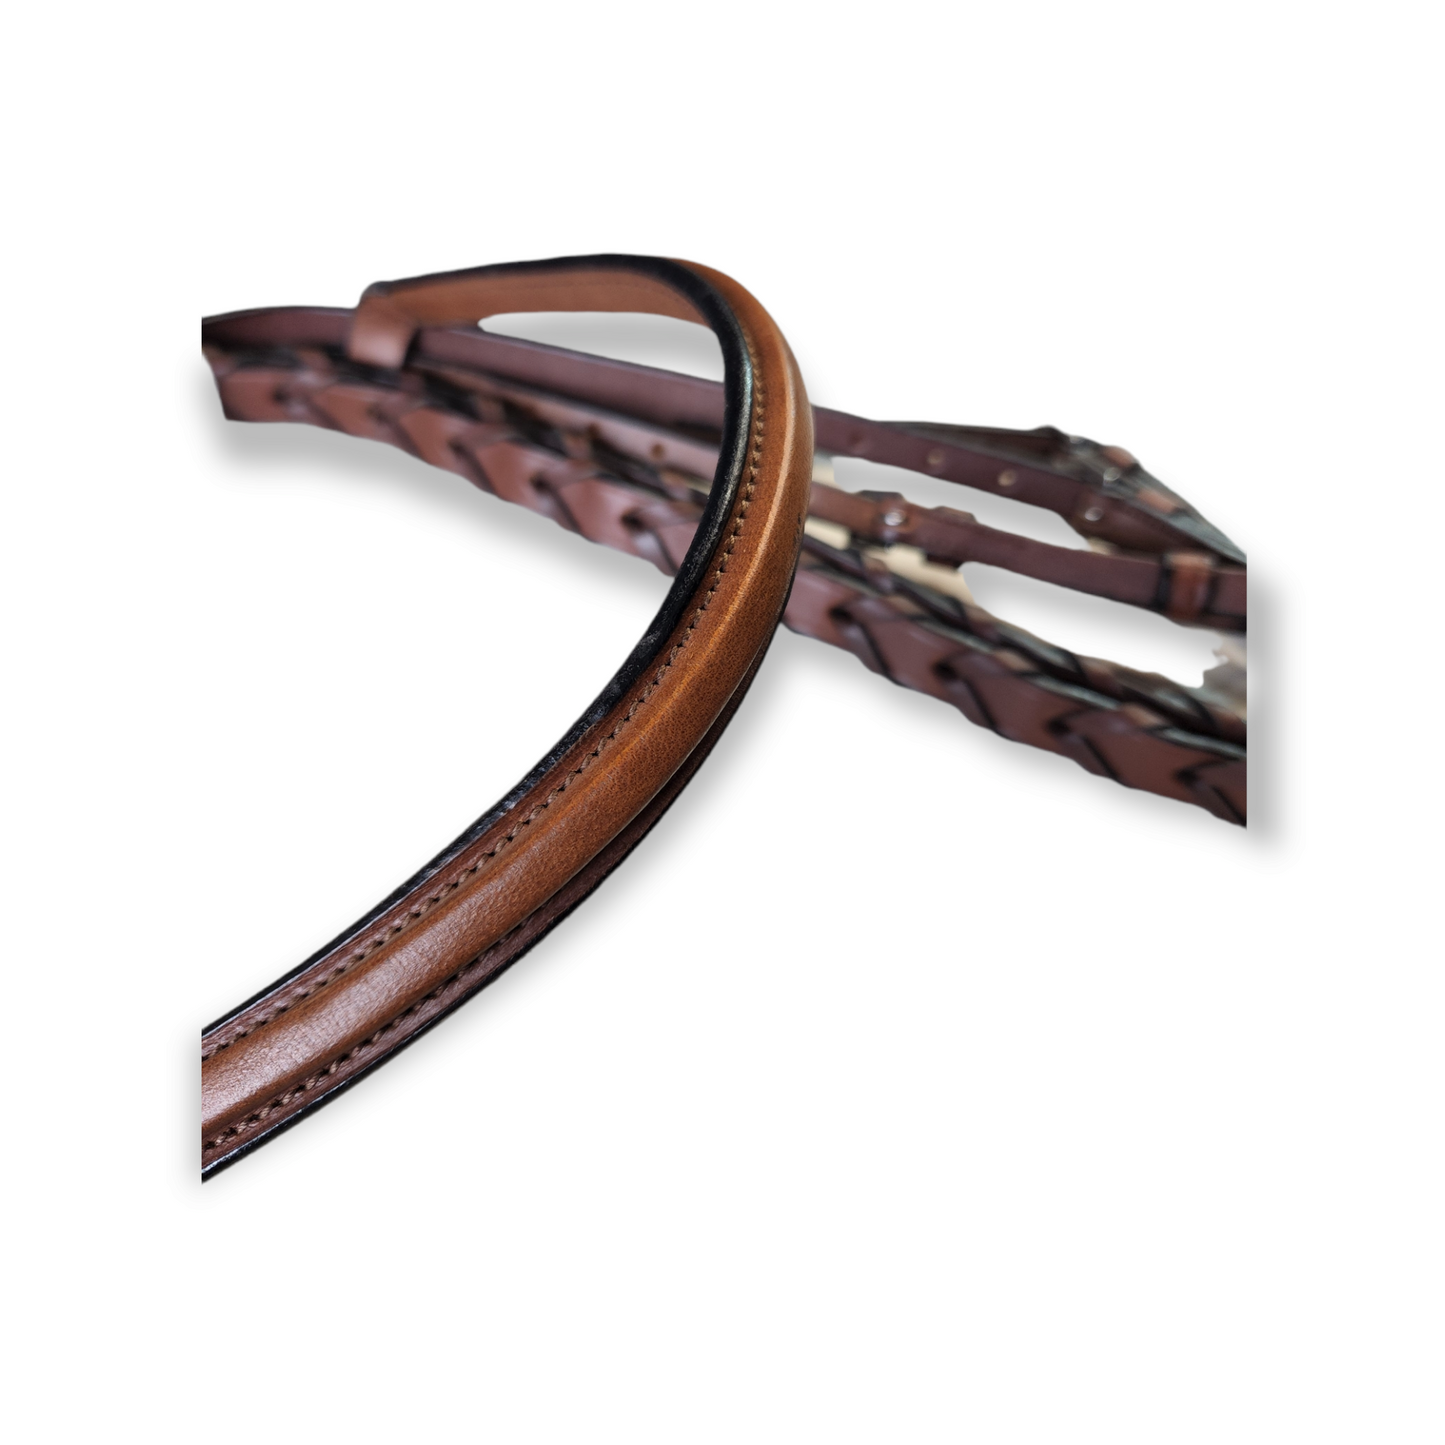 English Bridle with Reins